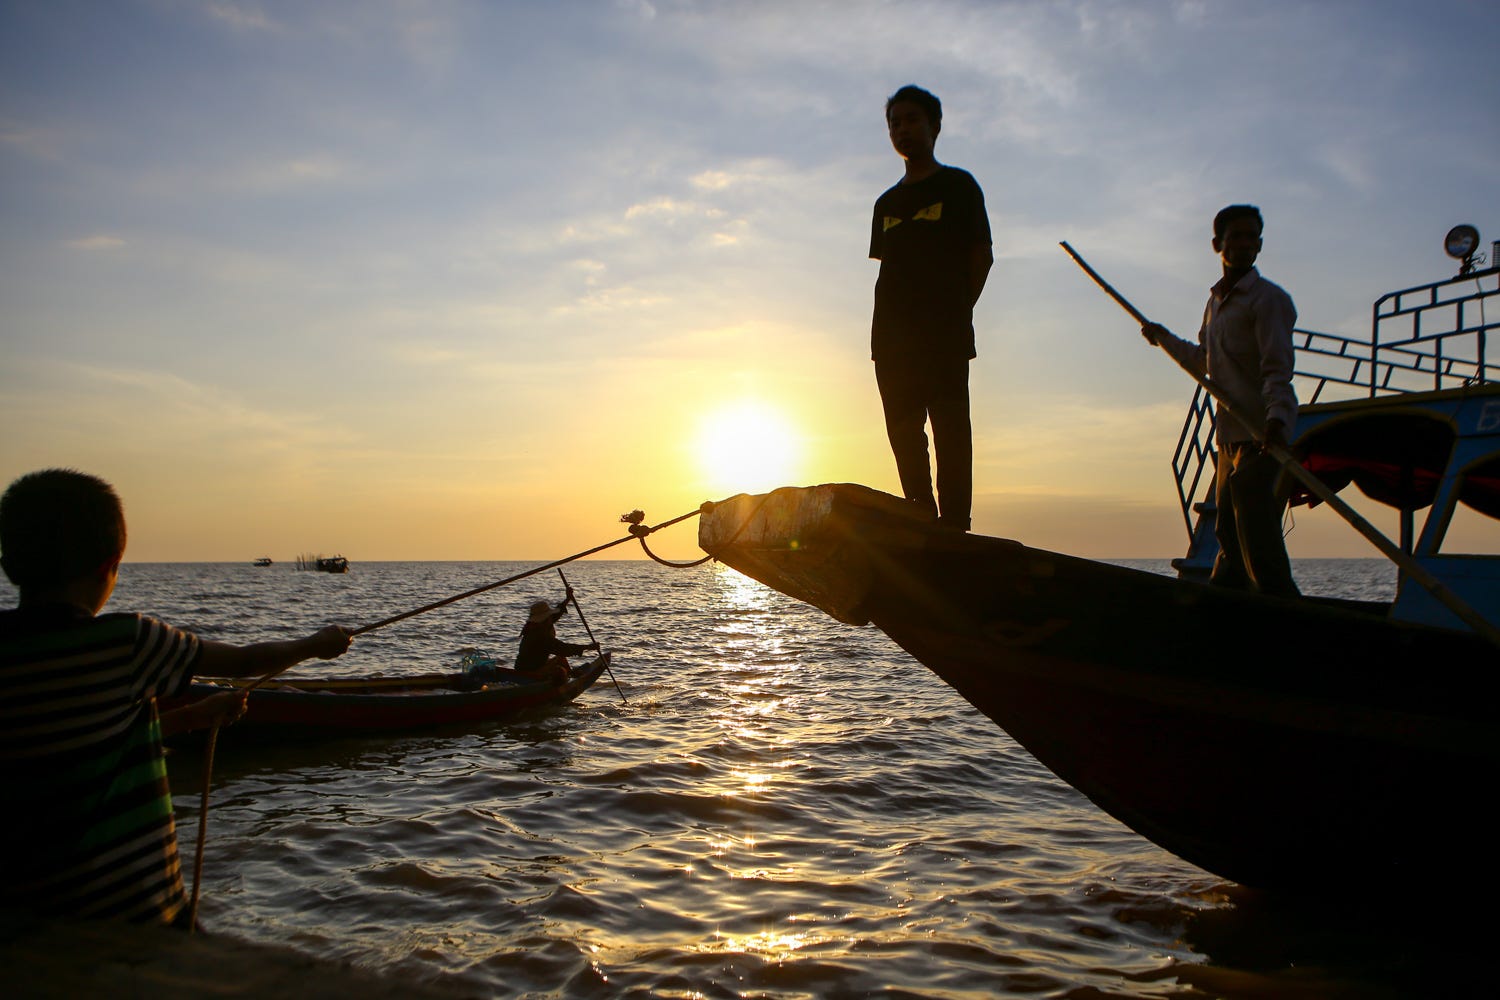 A photo of a long-tail boat with two men standing on it, silhoutted against the setting sun. The lake is flat, with a few smaller boats in the background. A boy holds a rope from the boat in the frame, helping bring it to the floating restaurant. 